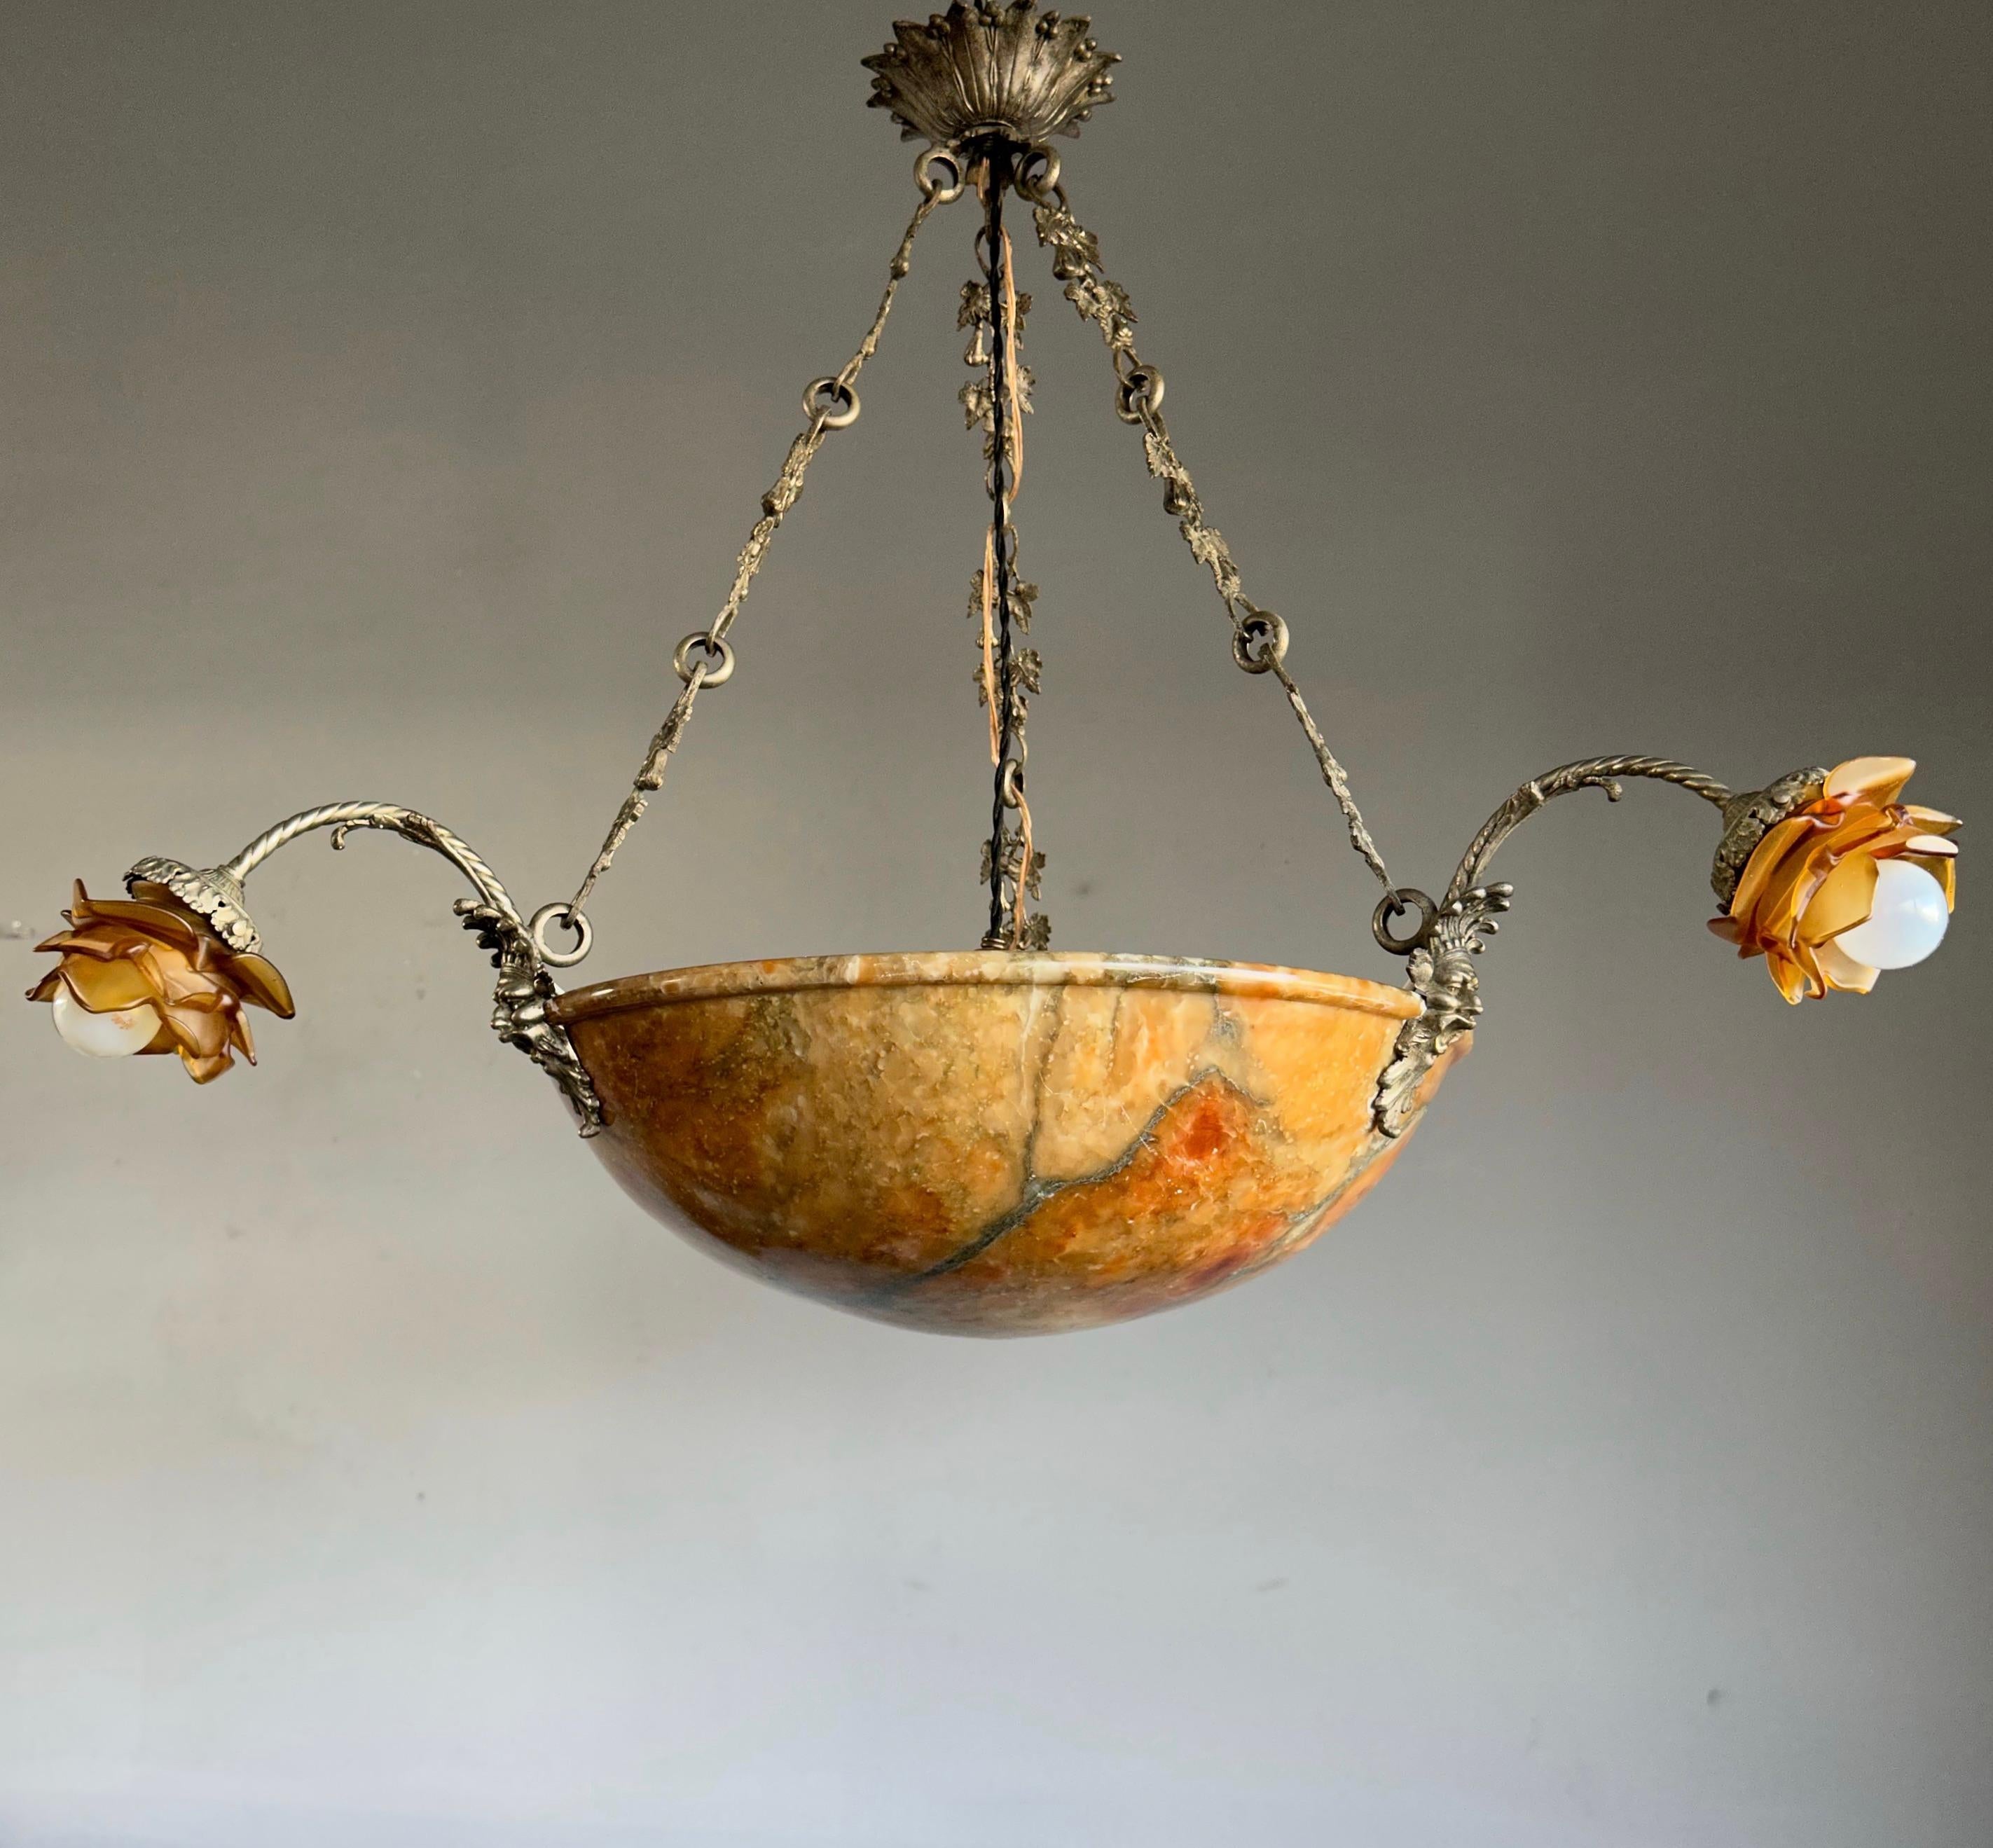 Extremely rare hand carved, early 1900s alabaster chandelier.

If you have been looking for an ideal size and marvelous looking alabaster chandelier for a project or for your own home then this sizeable and unique design specimen could be perfect